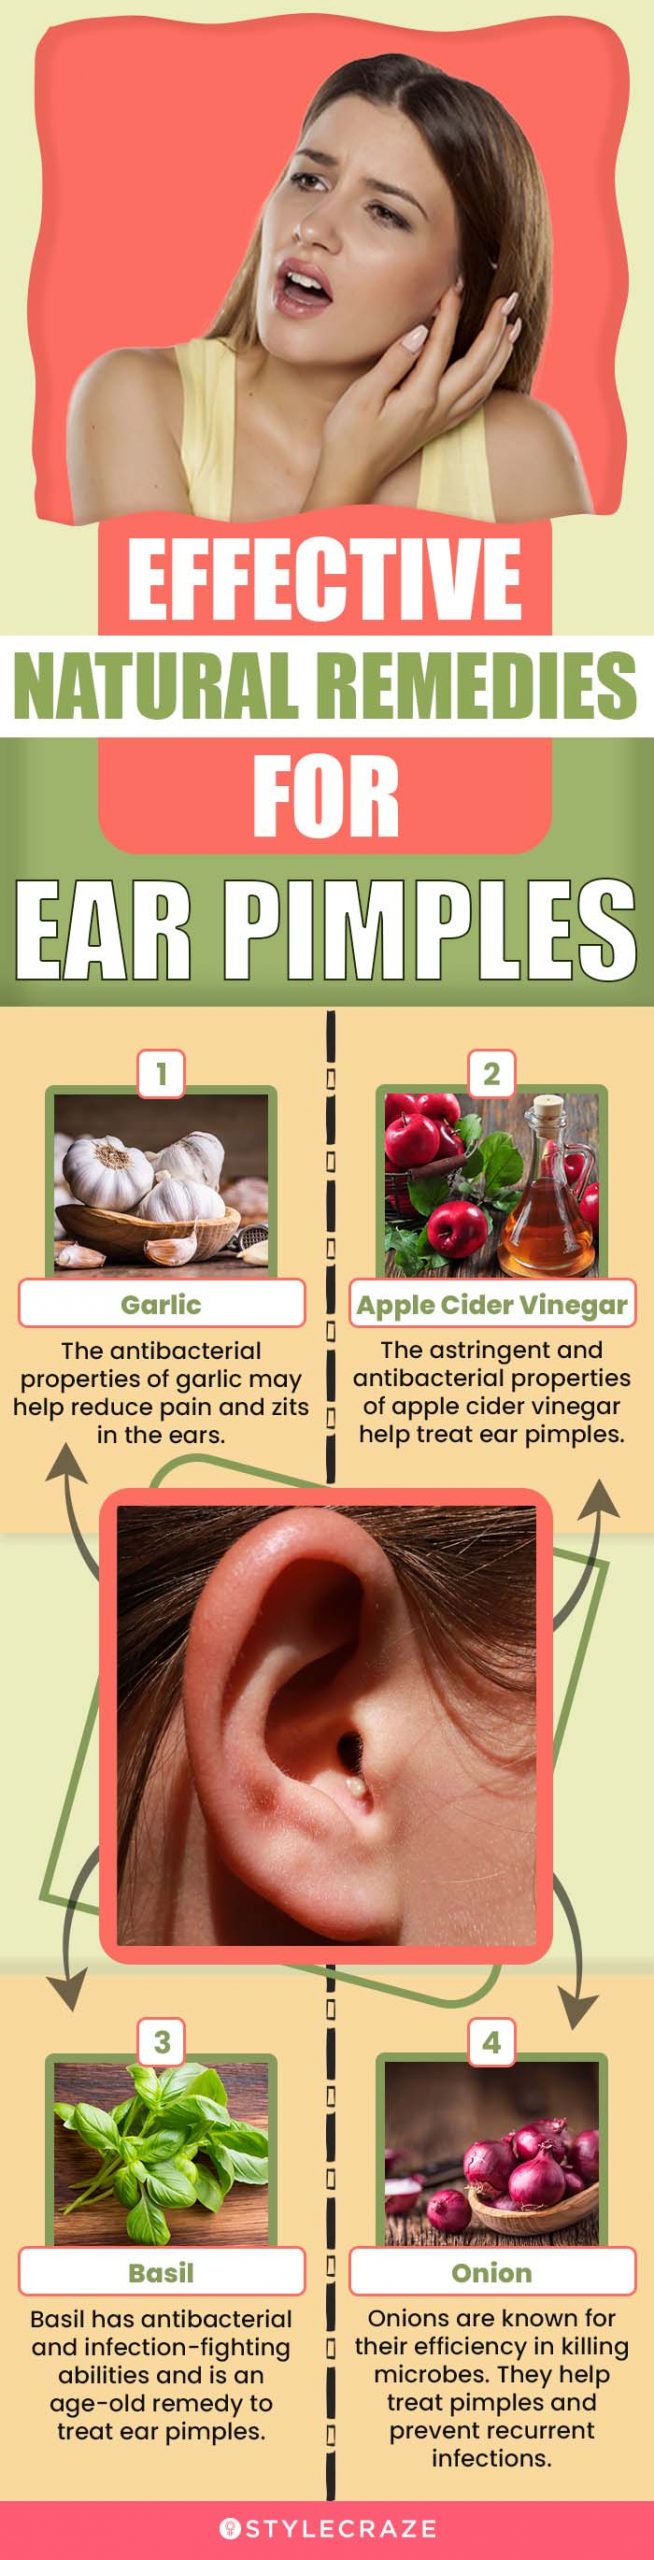 effective natural remedies for ear pimples(infographic)